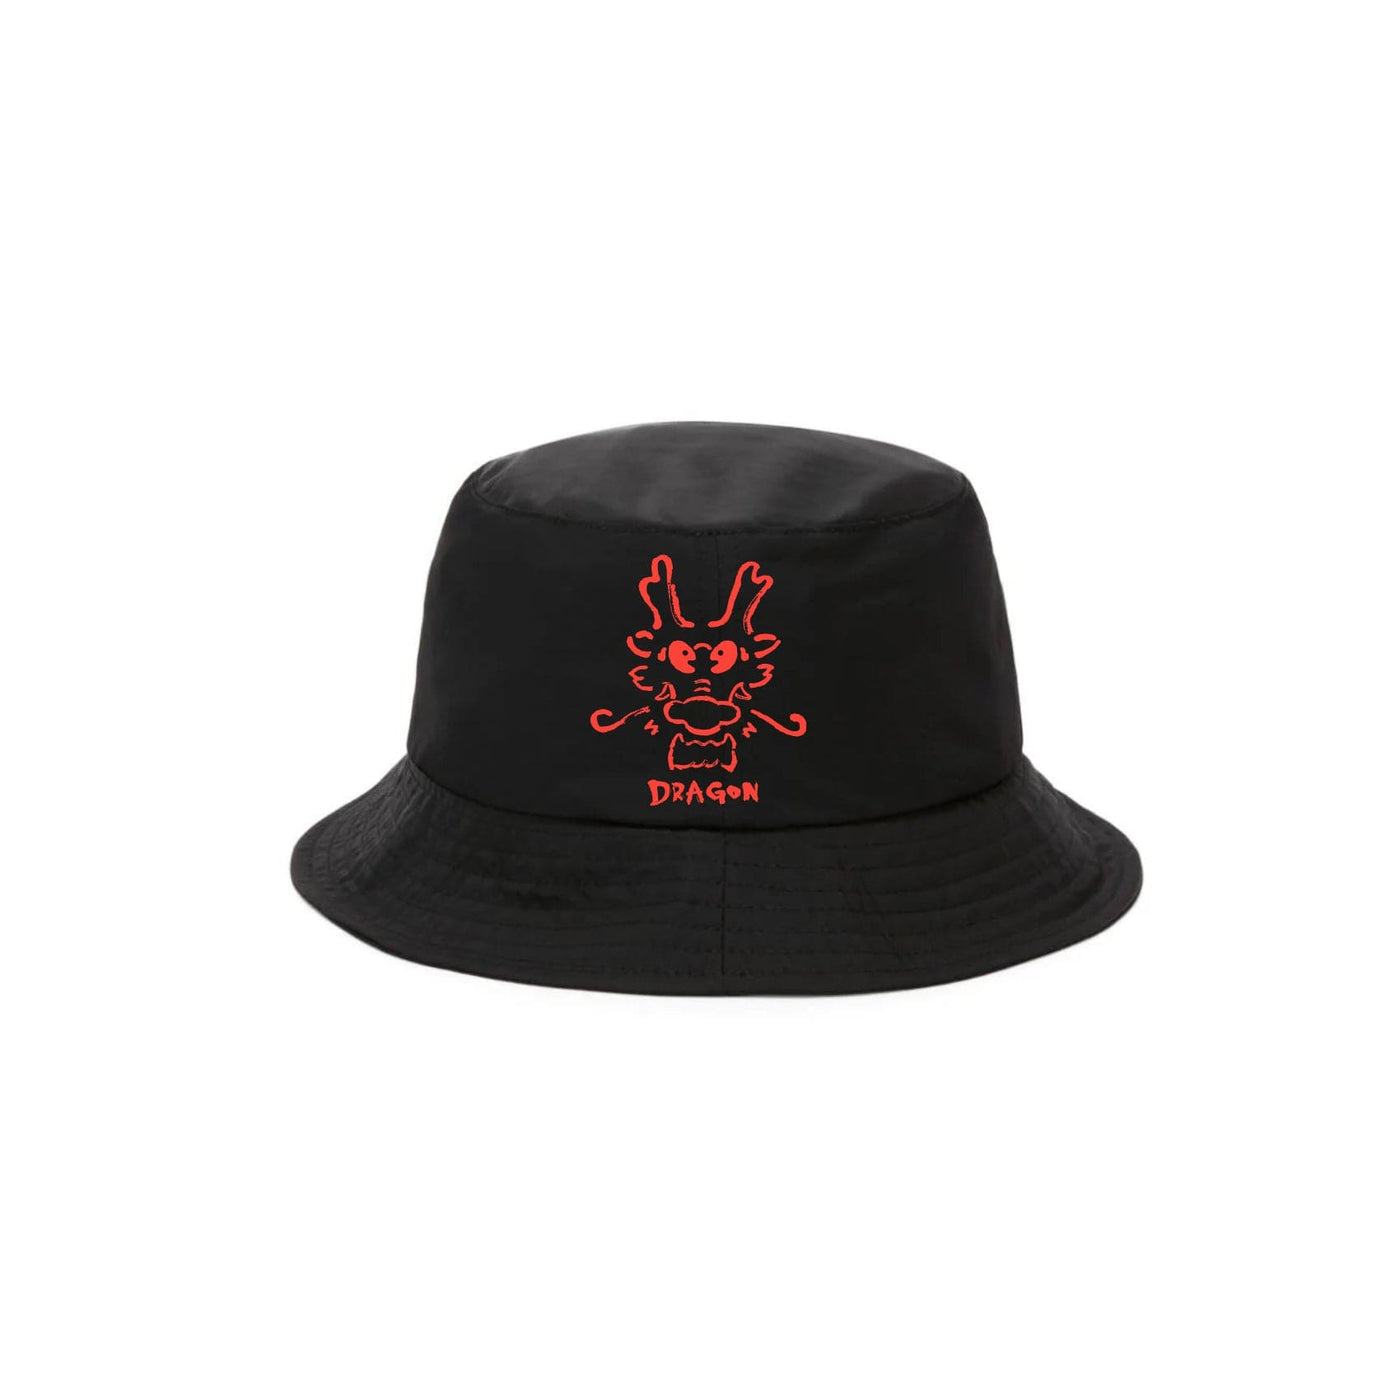 UIN Footwear T-shirt Mysterious Dragon Bucket Hat Canvas loafers